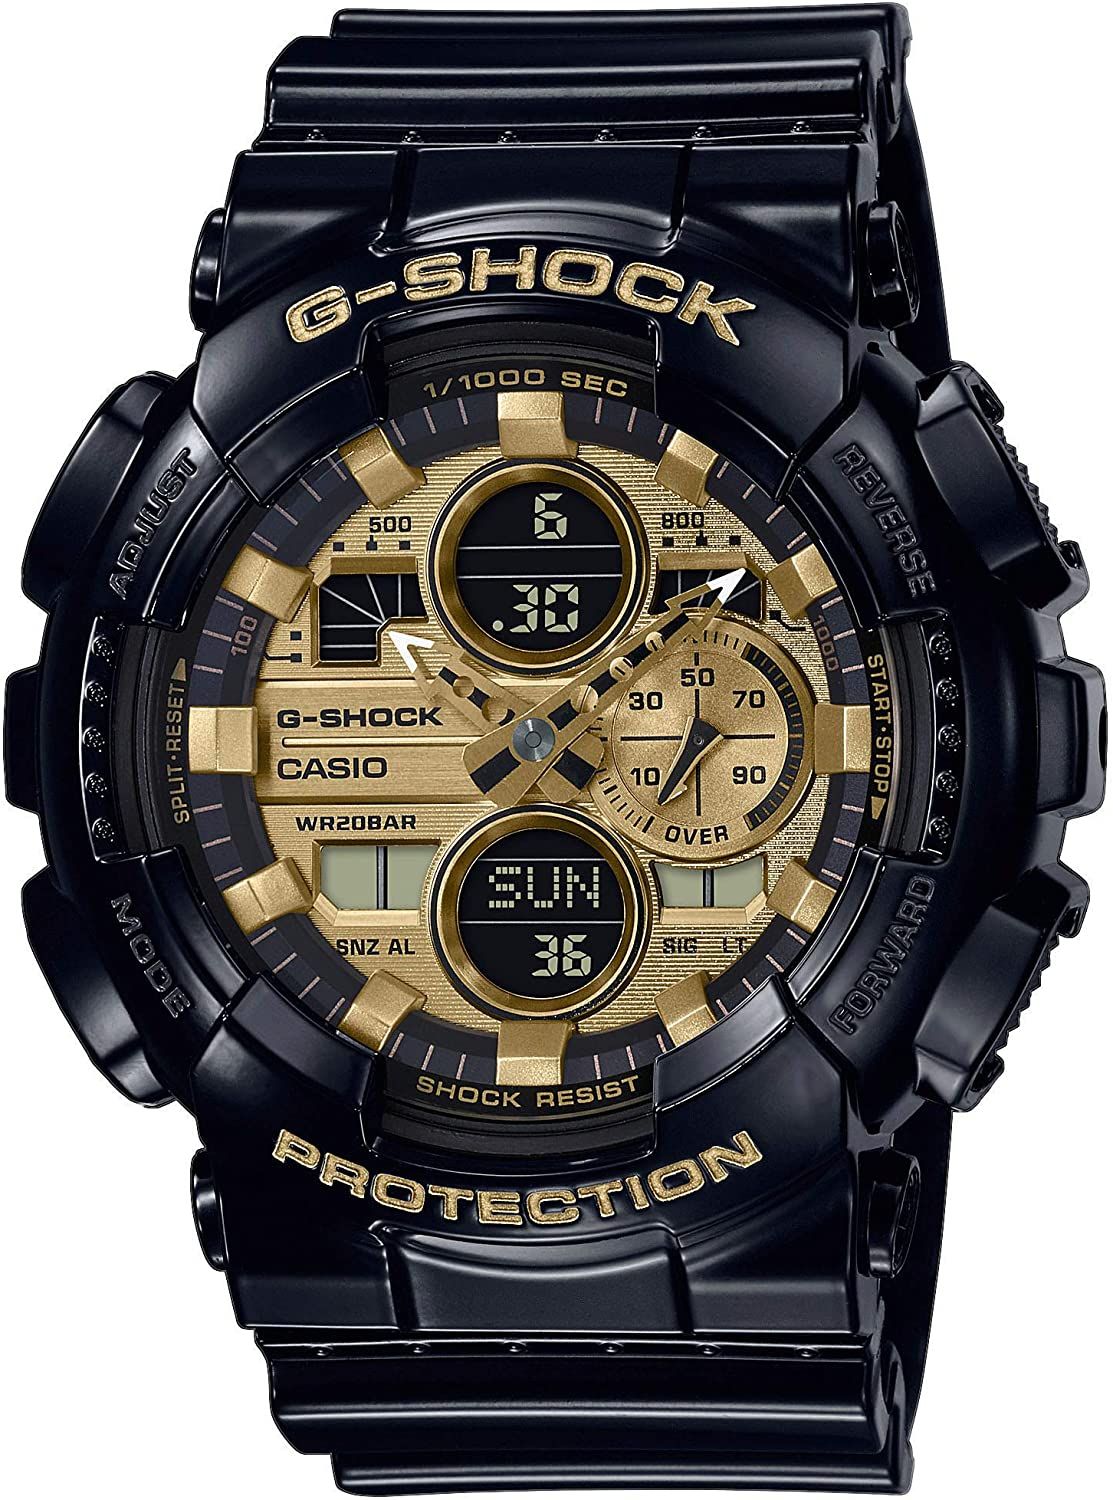 This Casio G-shock Analogue-Digital Watch for Men is the perfect timepiece to wear or to gift. It's Black 50 mm Round case combined with the comfortable Black Plastic will ensure you enjoy this stunning timepiece without any compromise. Operated by a high quality Quartz movement and water resistant to 20 bars, your watch will keep ticking. This sporty and trendy watch is a perfect gift for New Year, birthday,valentine's day and so on  -The watch has a calendar function: Day-Date, Stop Watch, Worldtime, Timer, Alarm, Alarm High quality 21 cm length, 28 mm wide, Black Plastic strap with a Buckle Case Diameter: 50 mm, Case height: 16 mm and Case color: Black Dial color: Gold